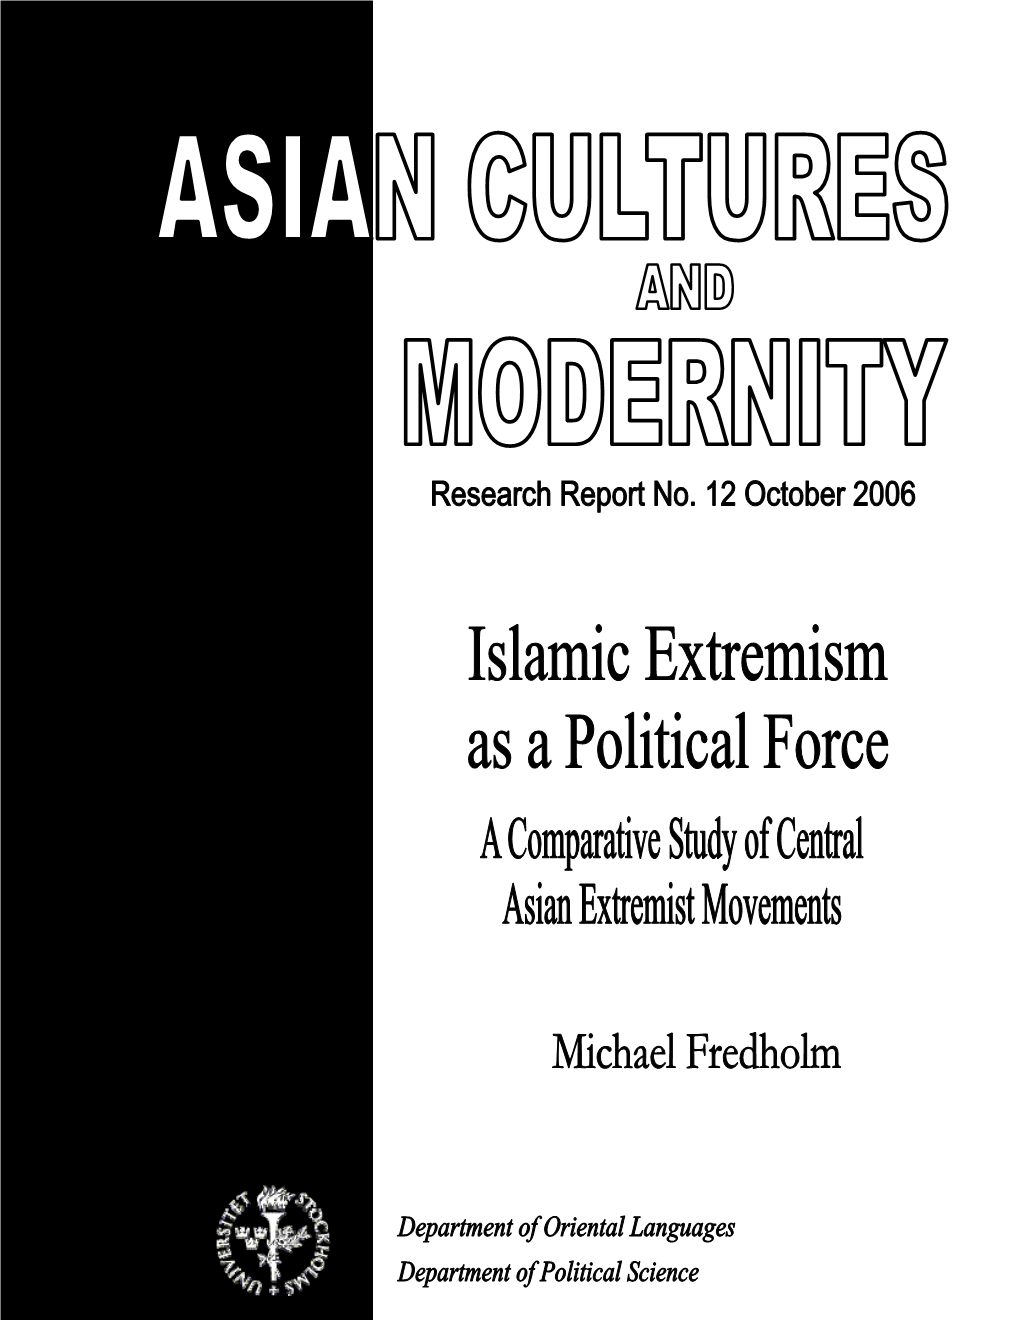 Islamic Extremism As a Political Force in Central Asia Michael Fredholm